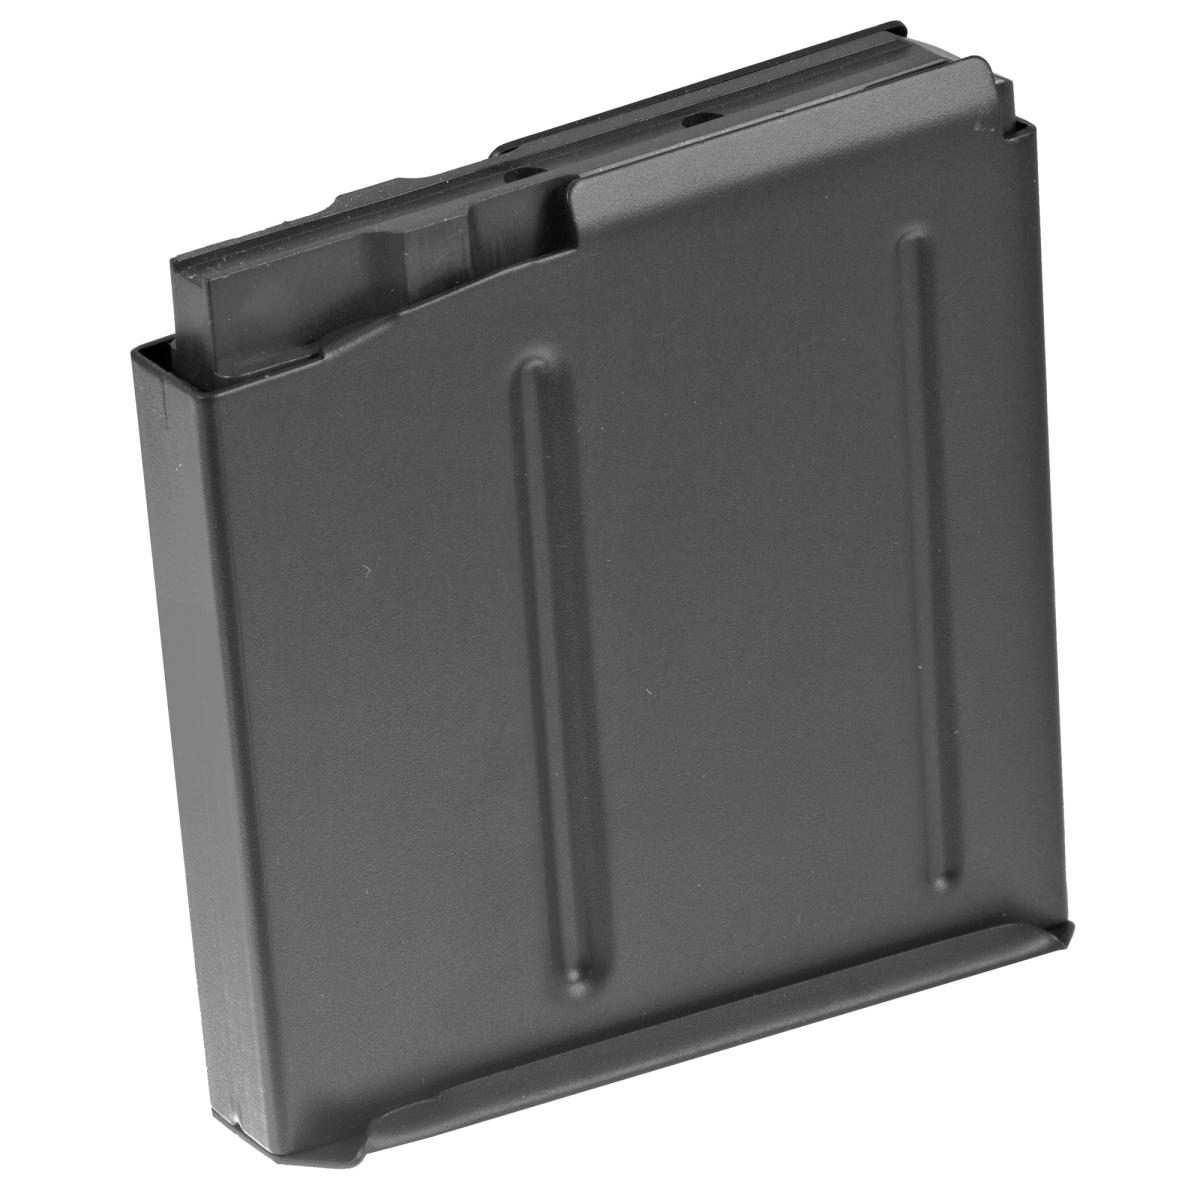 Ruger Precision Rifle Magazine 300 Win Mag 5 Rounds Black 300 Winchester Magnum